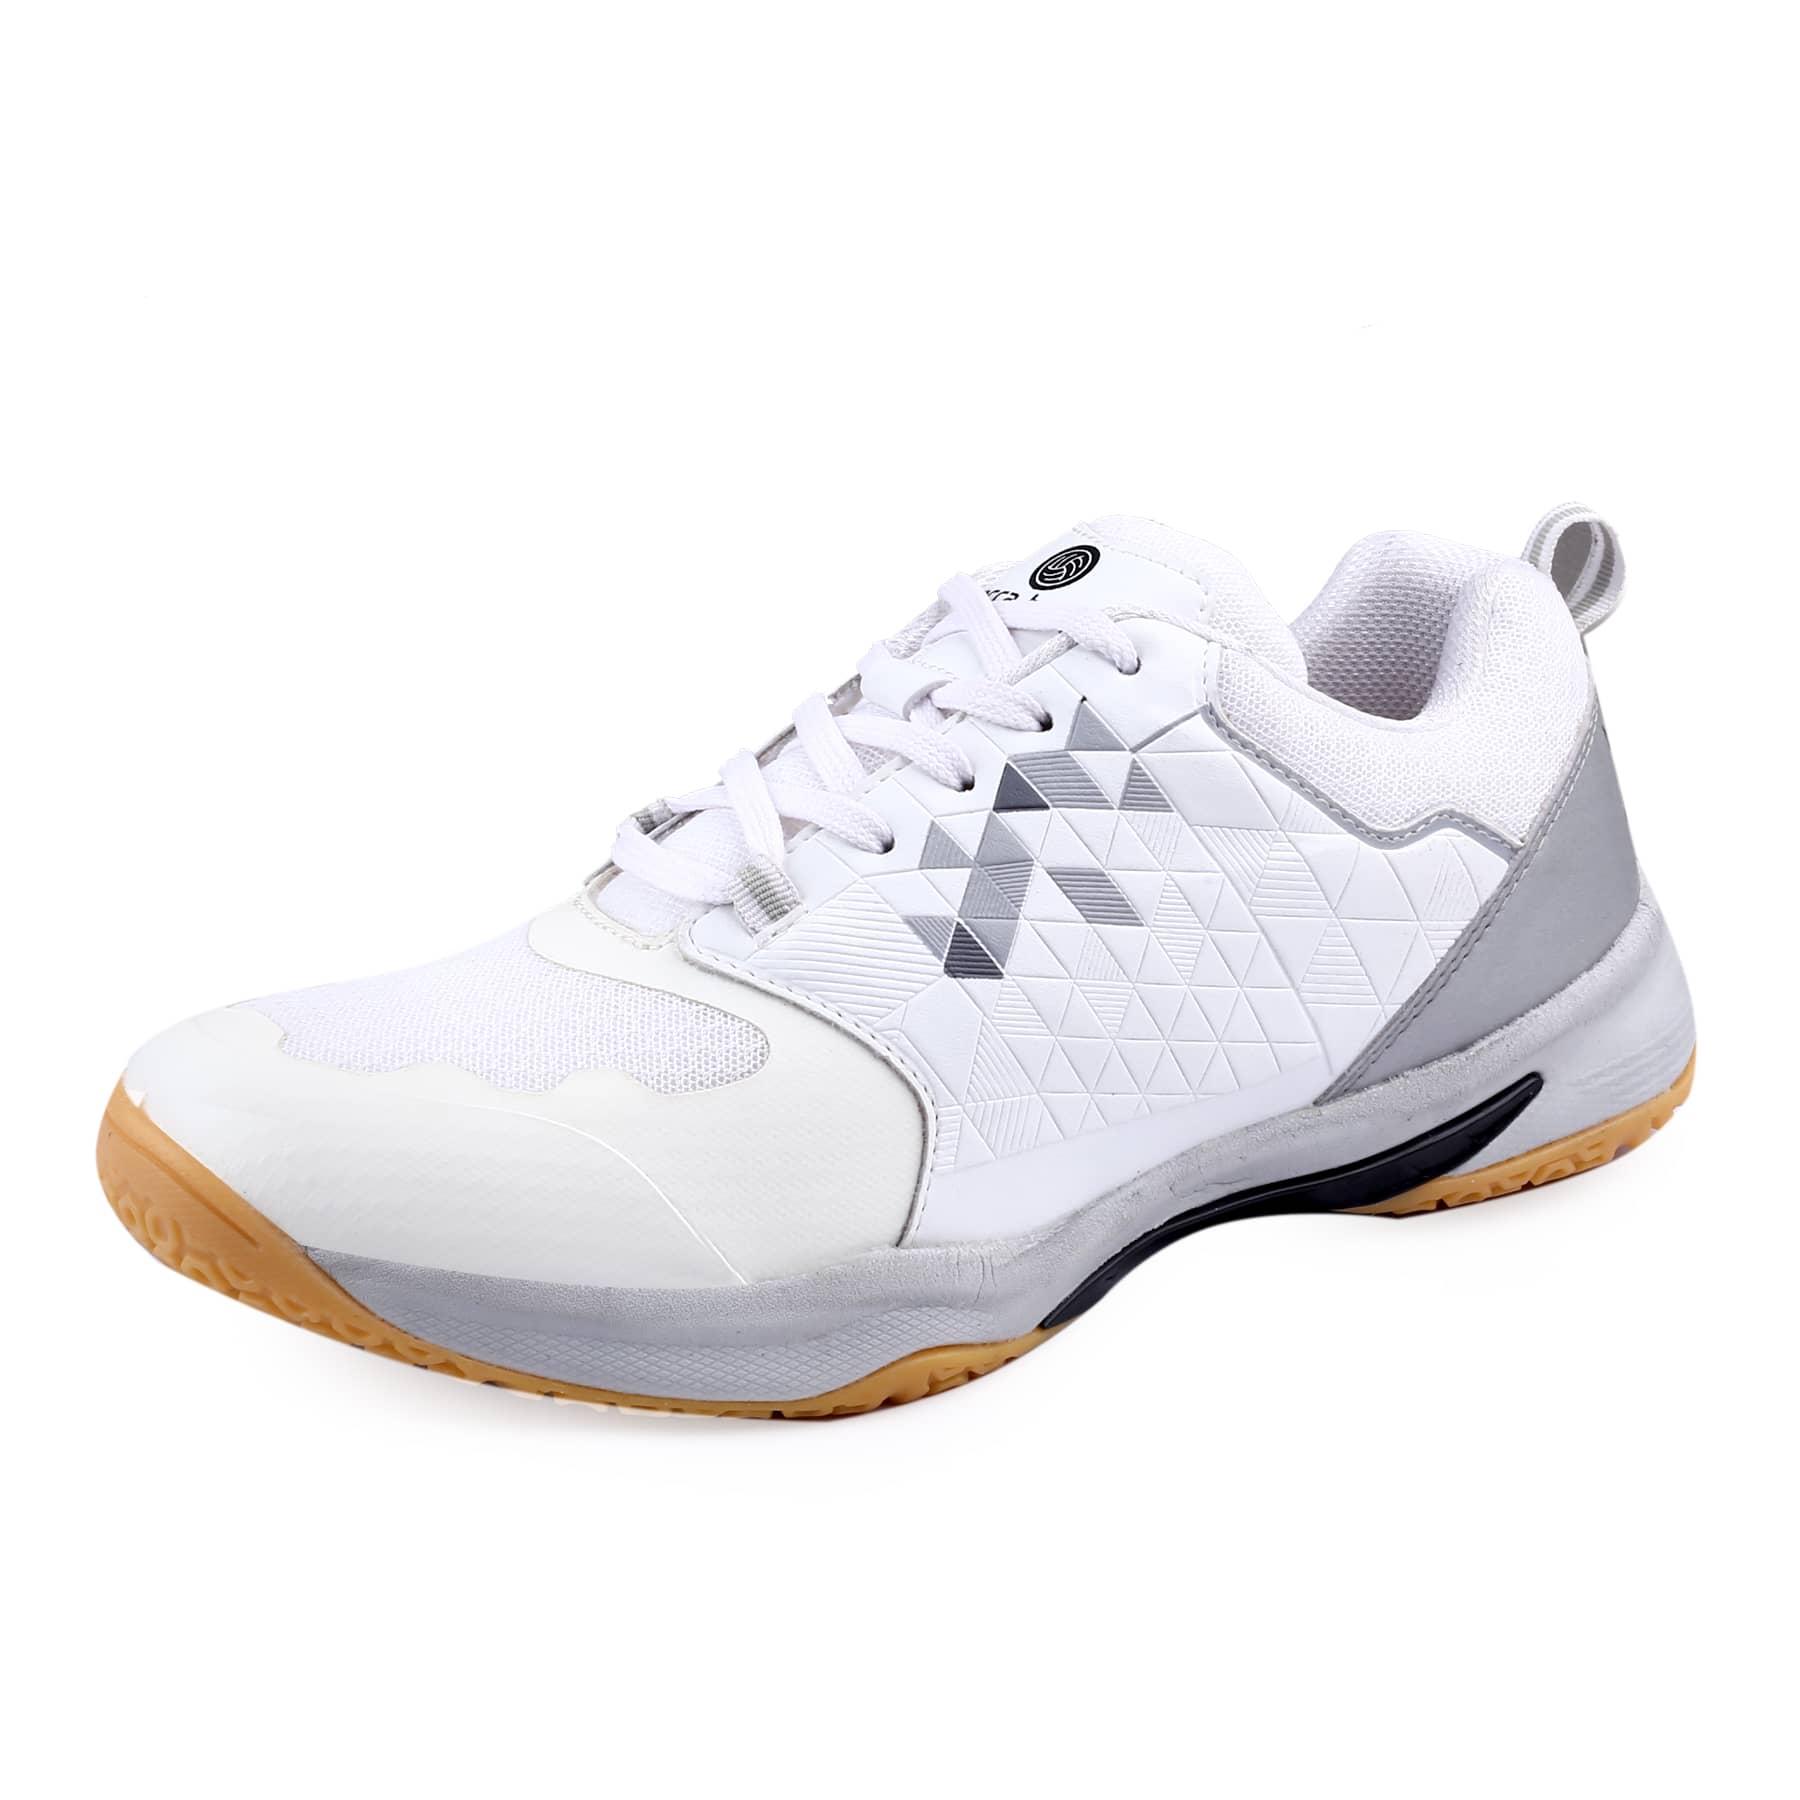 Bacca Bucci Pinnacle SwiftStrike - High-Performance Court Shoe with Non-Marking Outsole, Enhanced Cushioning for Badminton, Table Tennis, Volleyball, Squash and Tennis - Breathable Design, Superior Grip & Stability